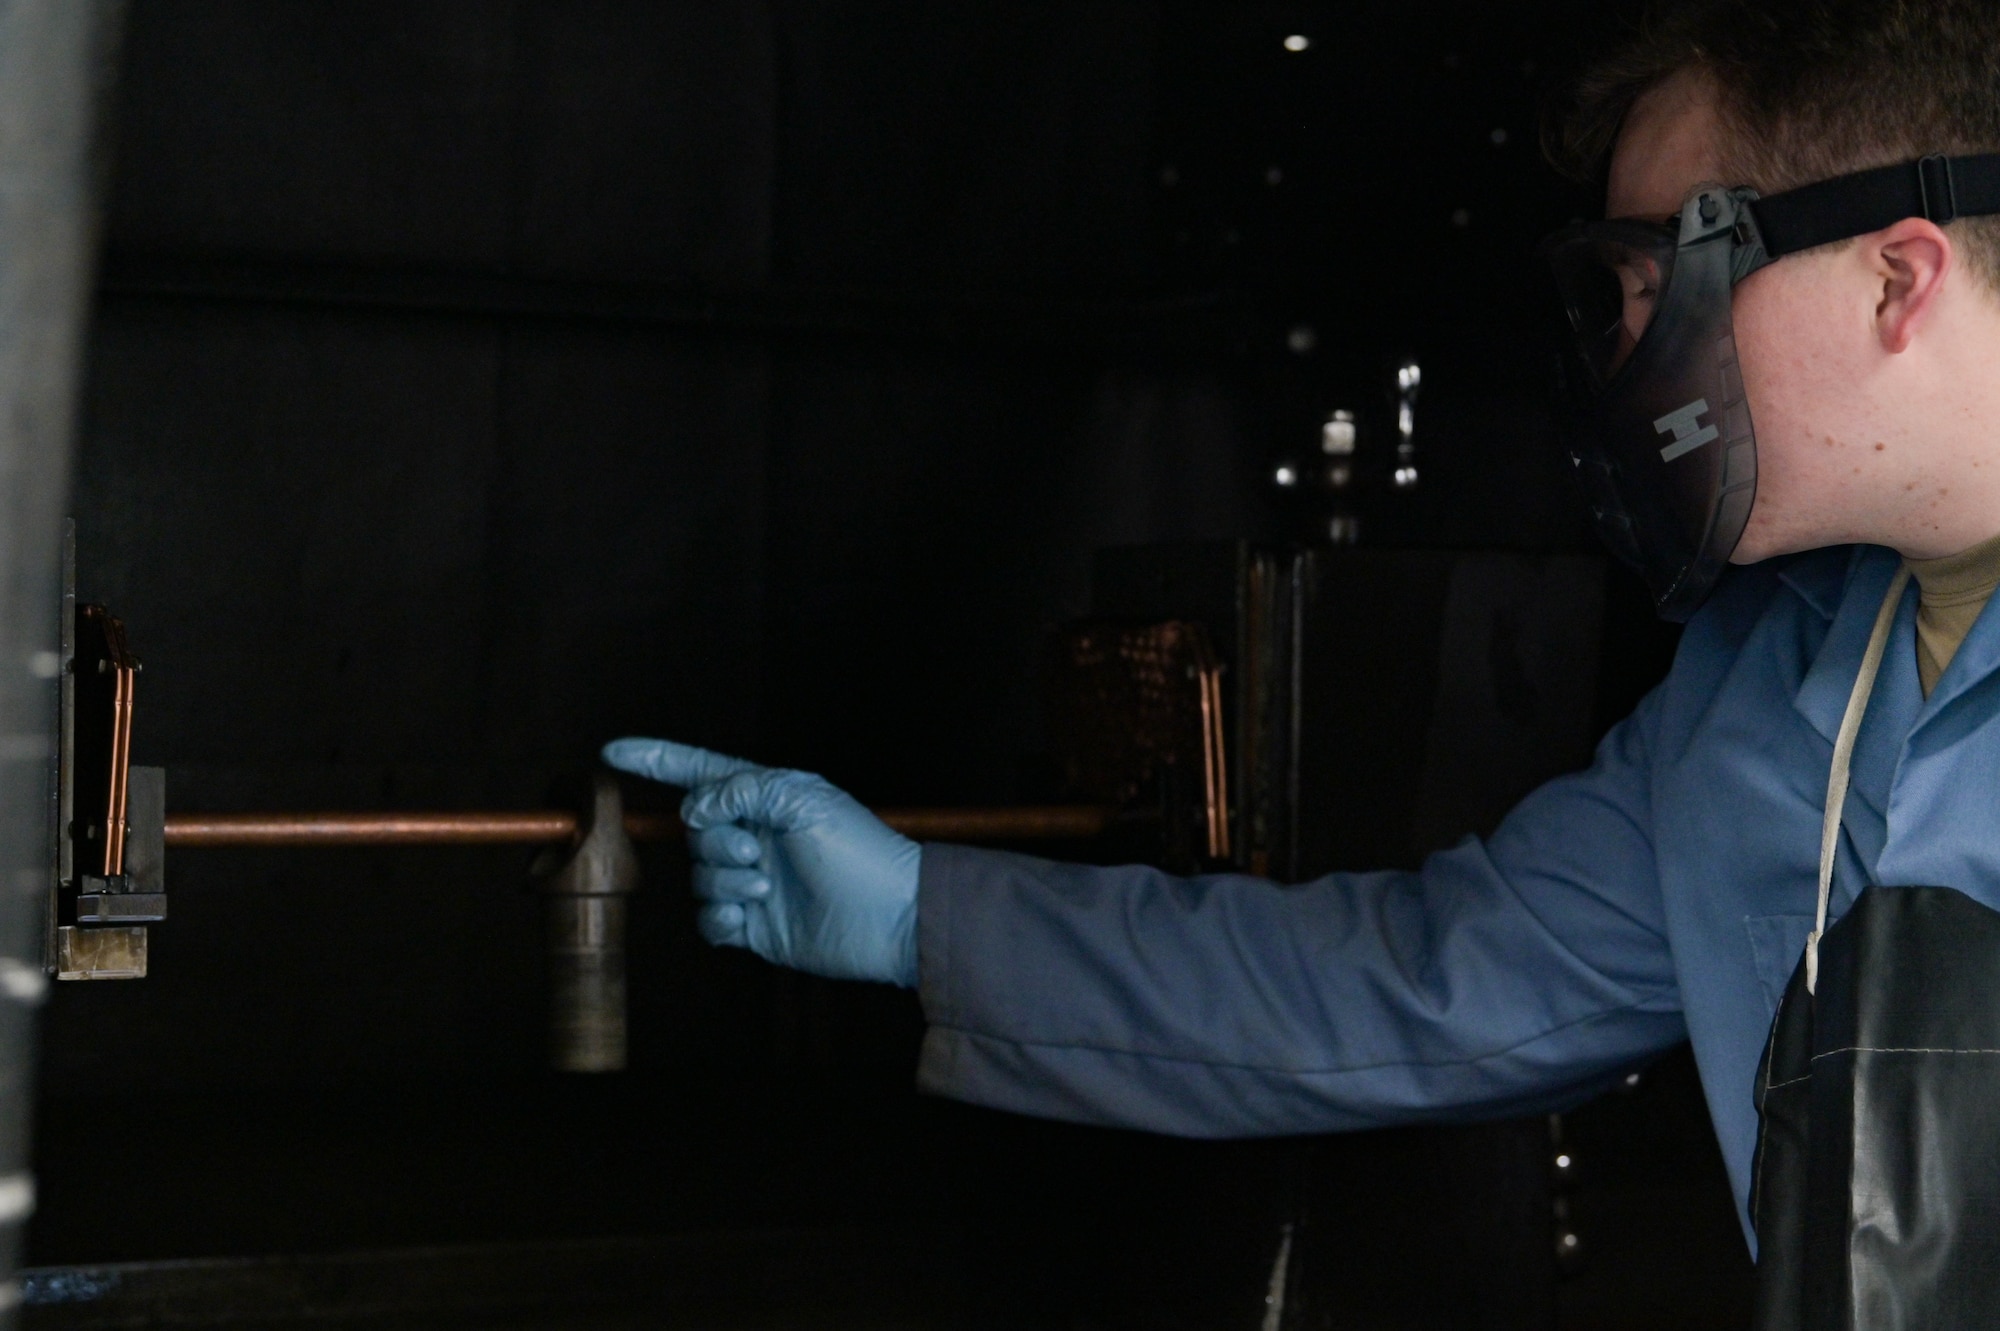 U.S. Air Force Tech. Sgt. Cody Dickerson, 23rd Maintenance Squadron nondestructive inspection supervisor, places a metal piece on a copper rod during an inspection at Moody Air Force Base, Georgia, Dec. 5, 2022. This magnetic particle inspection technique is used to detect cracks on different sizes of metal that require different levels of magnetism; the larger the piece of metal, the higher amperage it requires to create a stronger magnetic field. (U.S. Air Force photo by Senior Airman Rebeckah Medeiros)